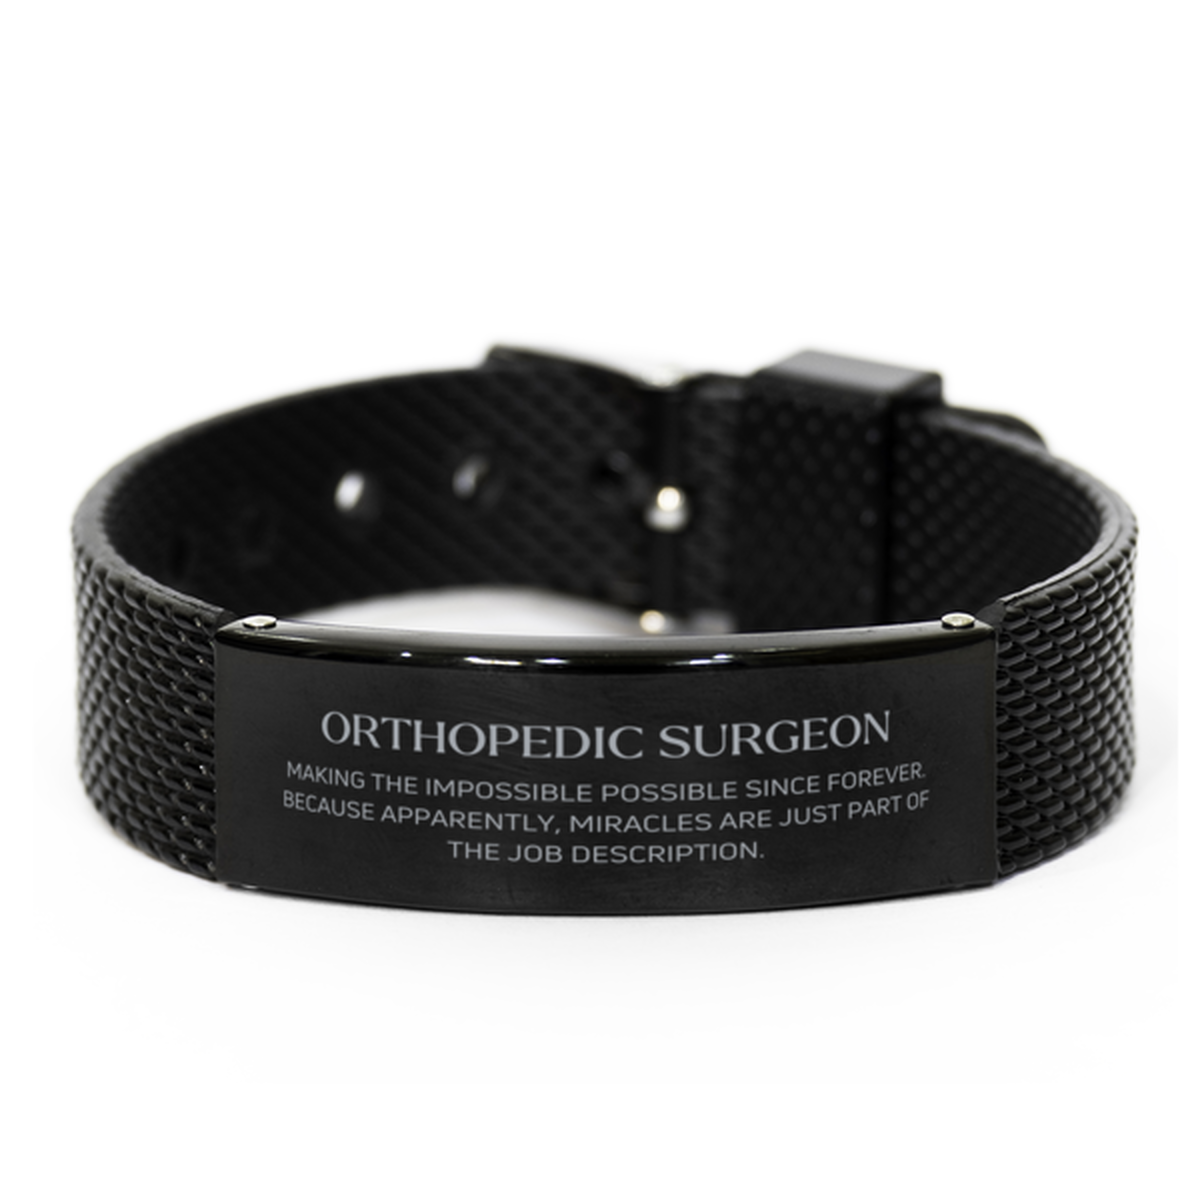 Funny Orthopedic Surgeon Gifts, Miracles are just part of the job description, Inspirational Birthday Black Shark Mesh Bracelet For Orthopedic Surgeon, Men, Women, Coworkers, Friends, Boss